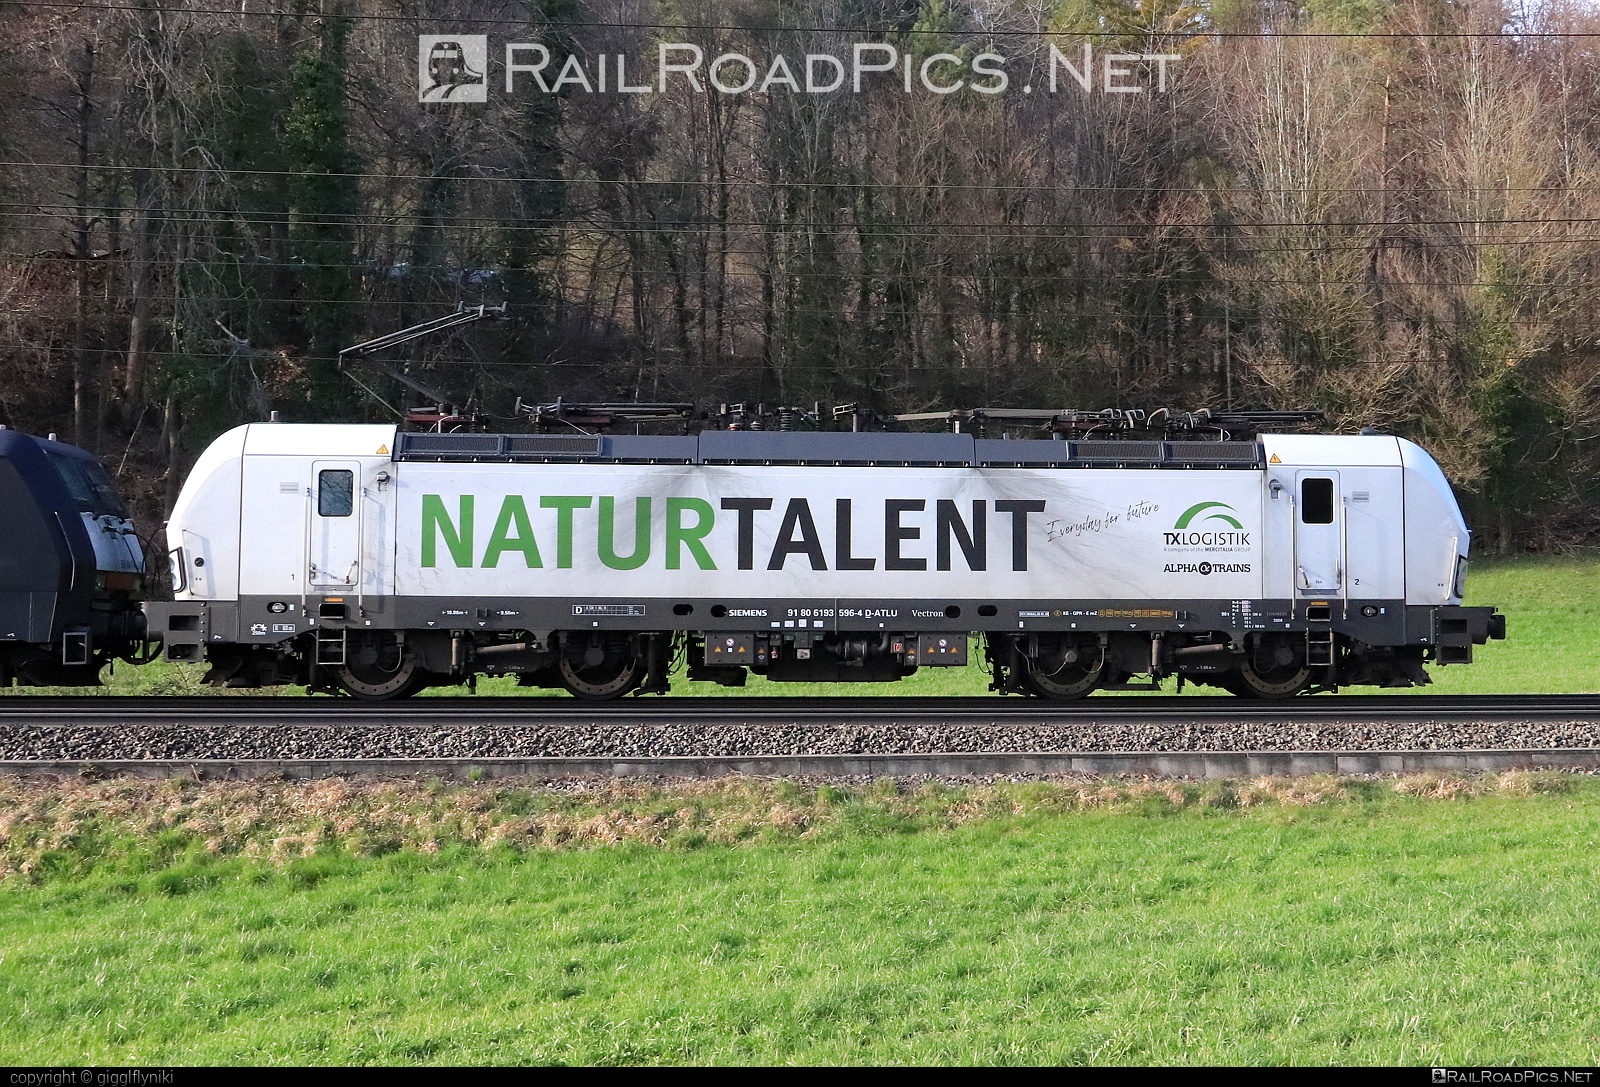 Siemens Vectron MS - 193 596 operated by TXLogistik #alphatrainsluxembourg #siemens #siemensVectron #siemensVectronMS #txlogistik #vectron #vectronMS